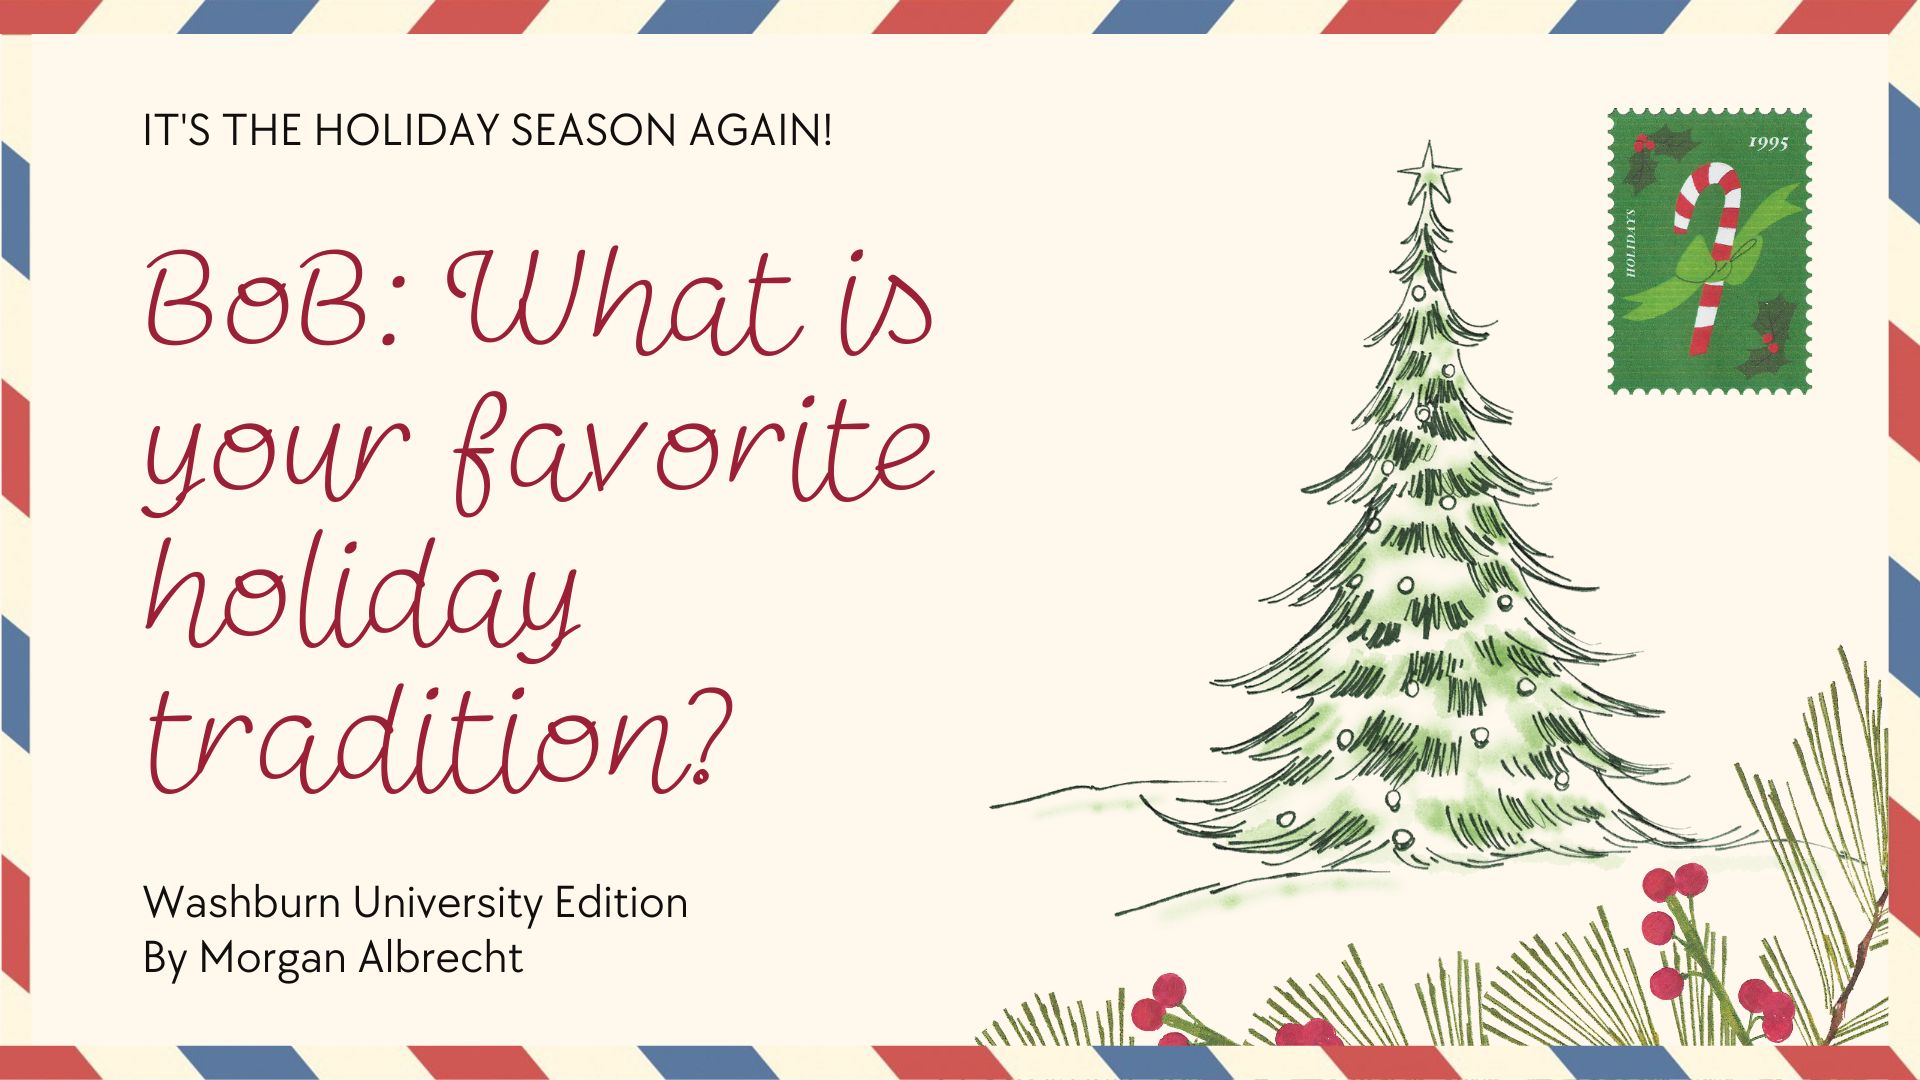 B.O.B: What is your favorite holiday tradition?